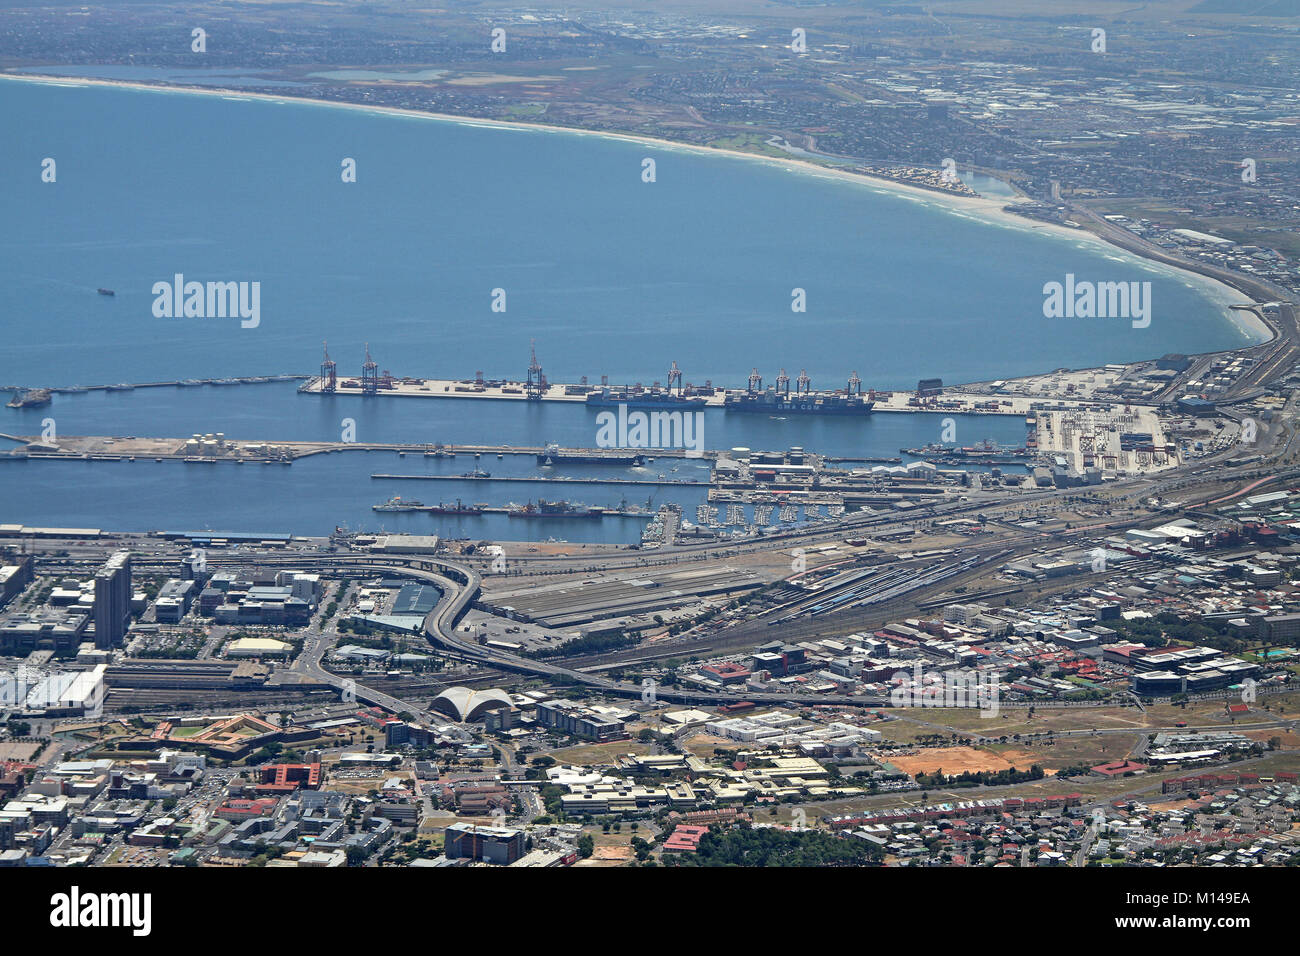 View of Cape Town Harbour from the top of Table Mountain, Western Cape, South Africa. Stock Photo